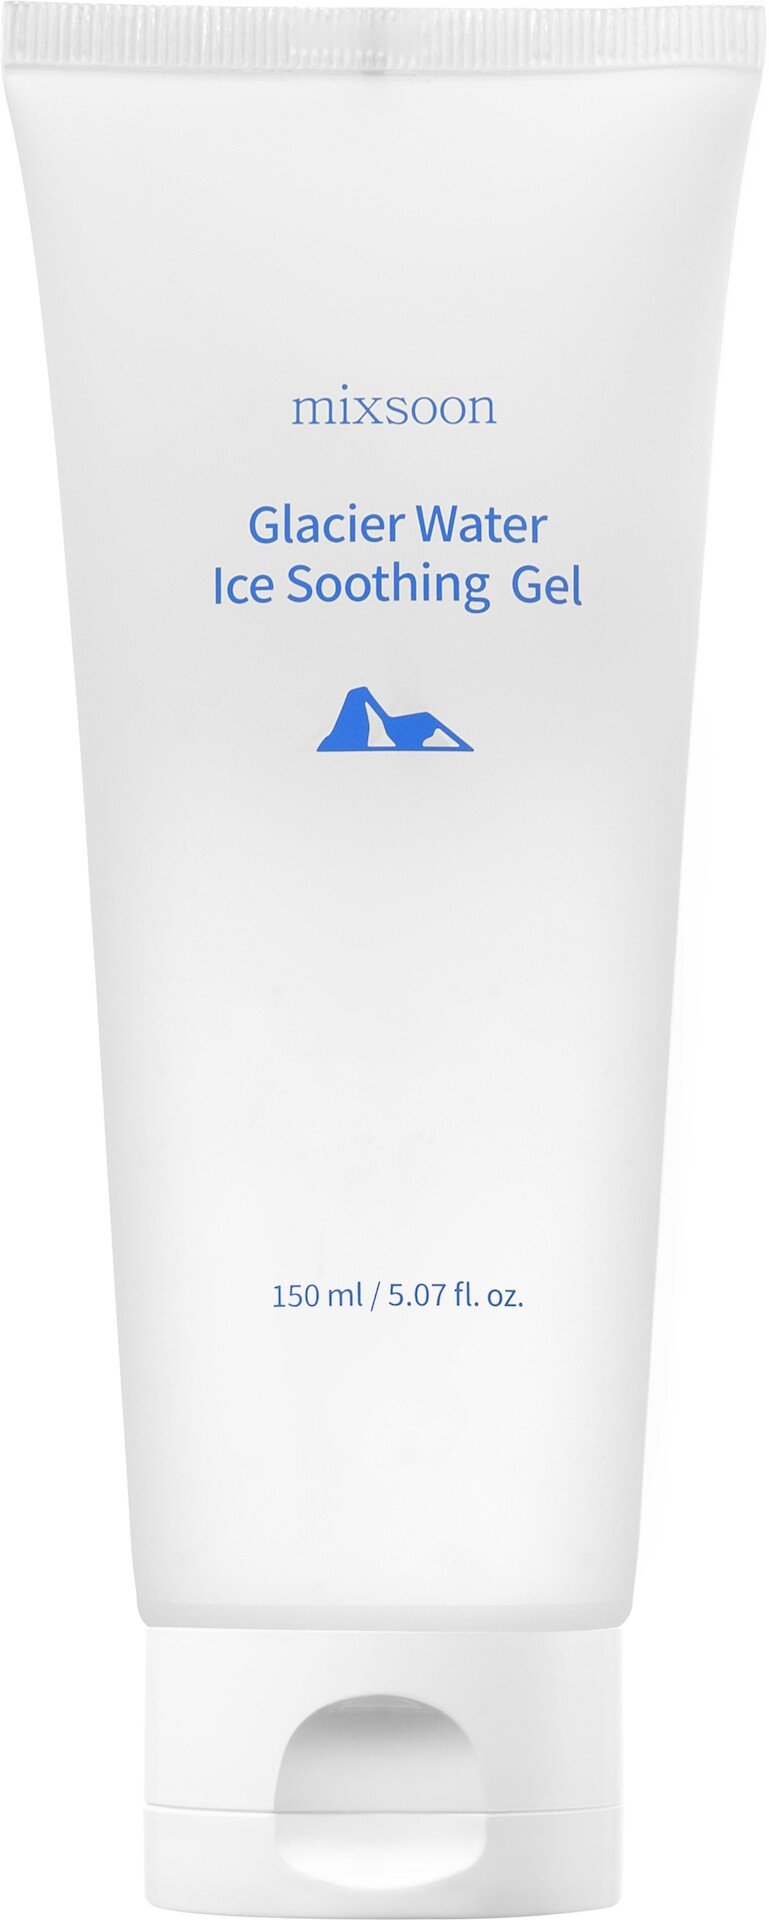 Mixsoon Glacier Water Ice Soothing Gel 150ml